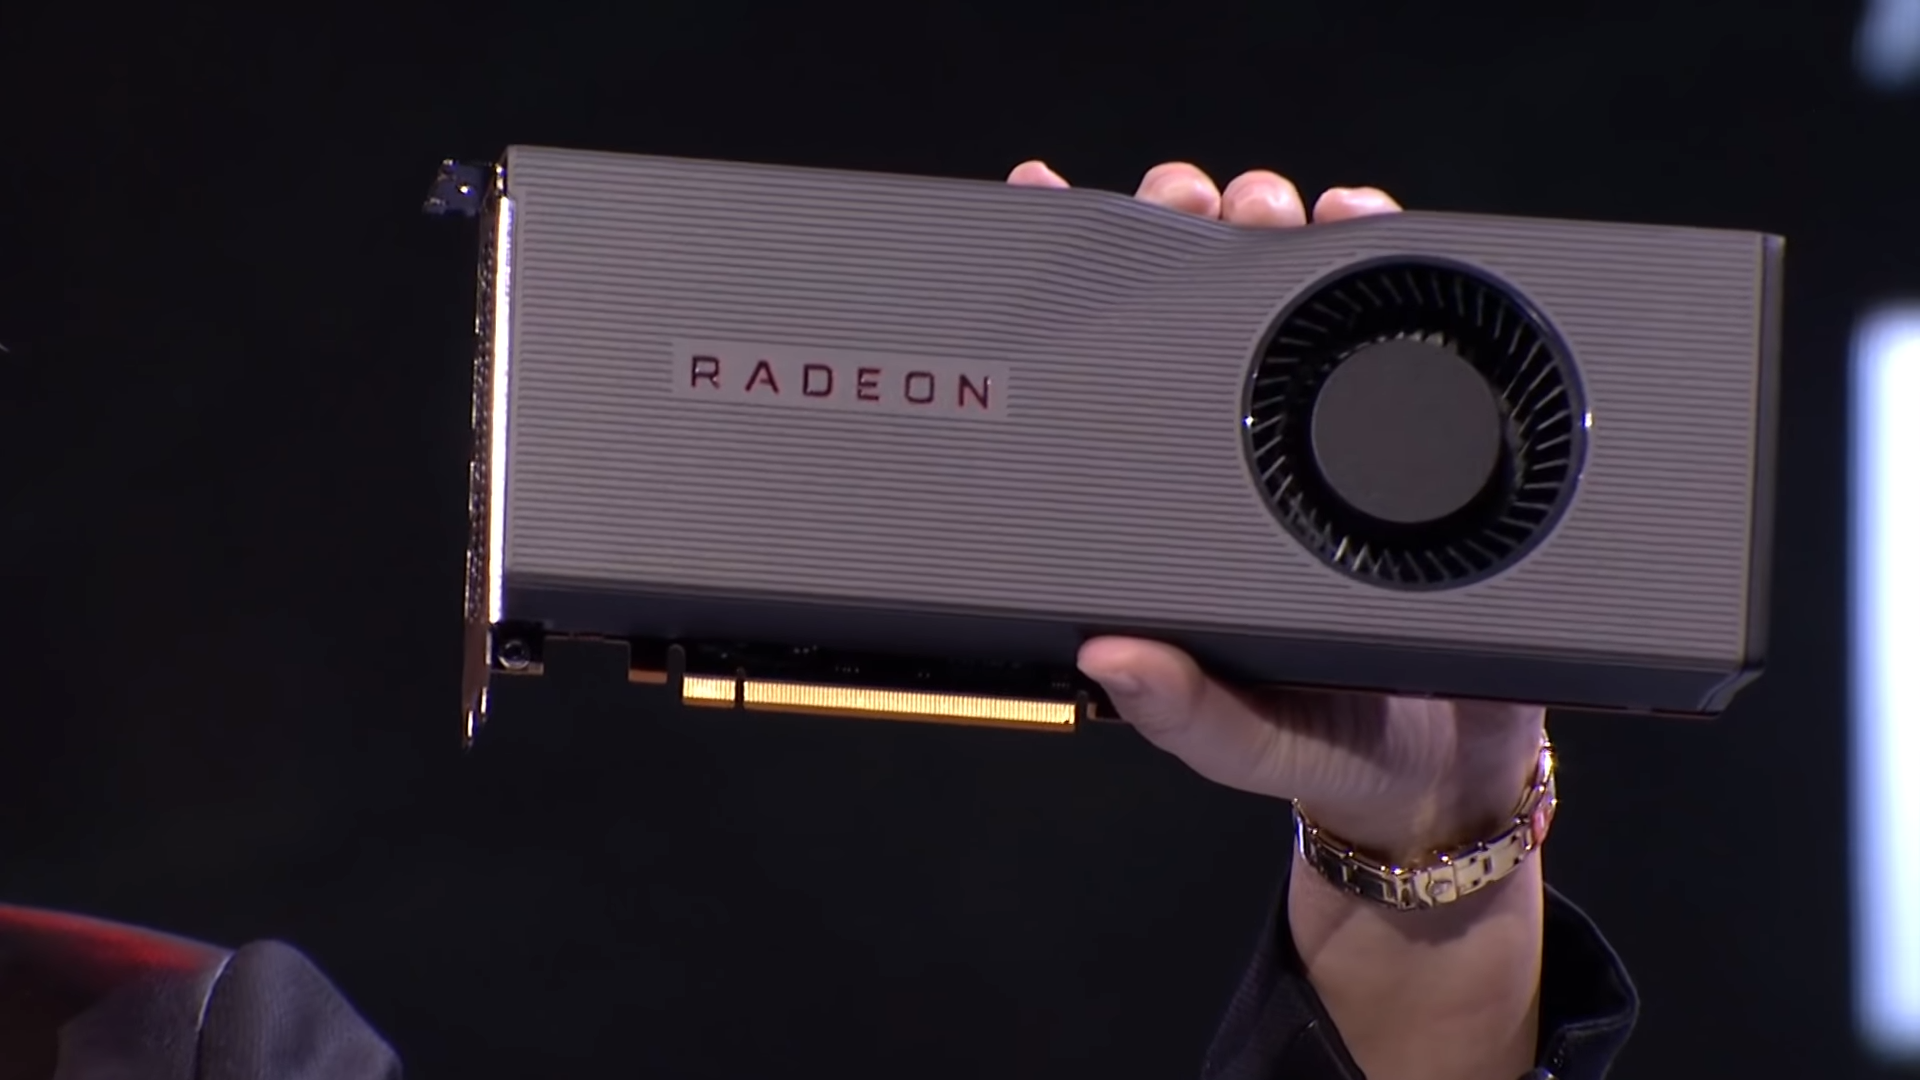 AMD Radeon RX 5700 XT vs. RX 5700: Which Is the Better Value?